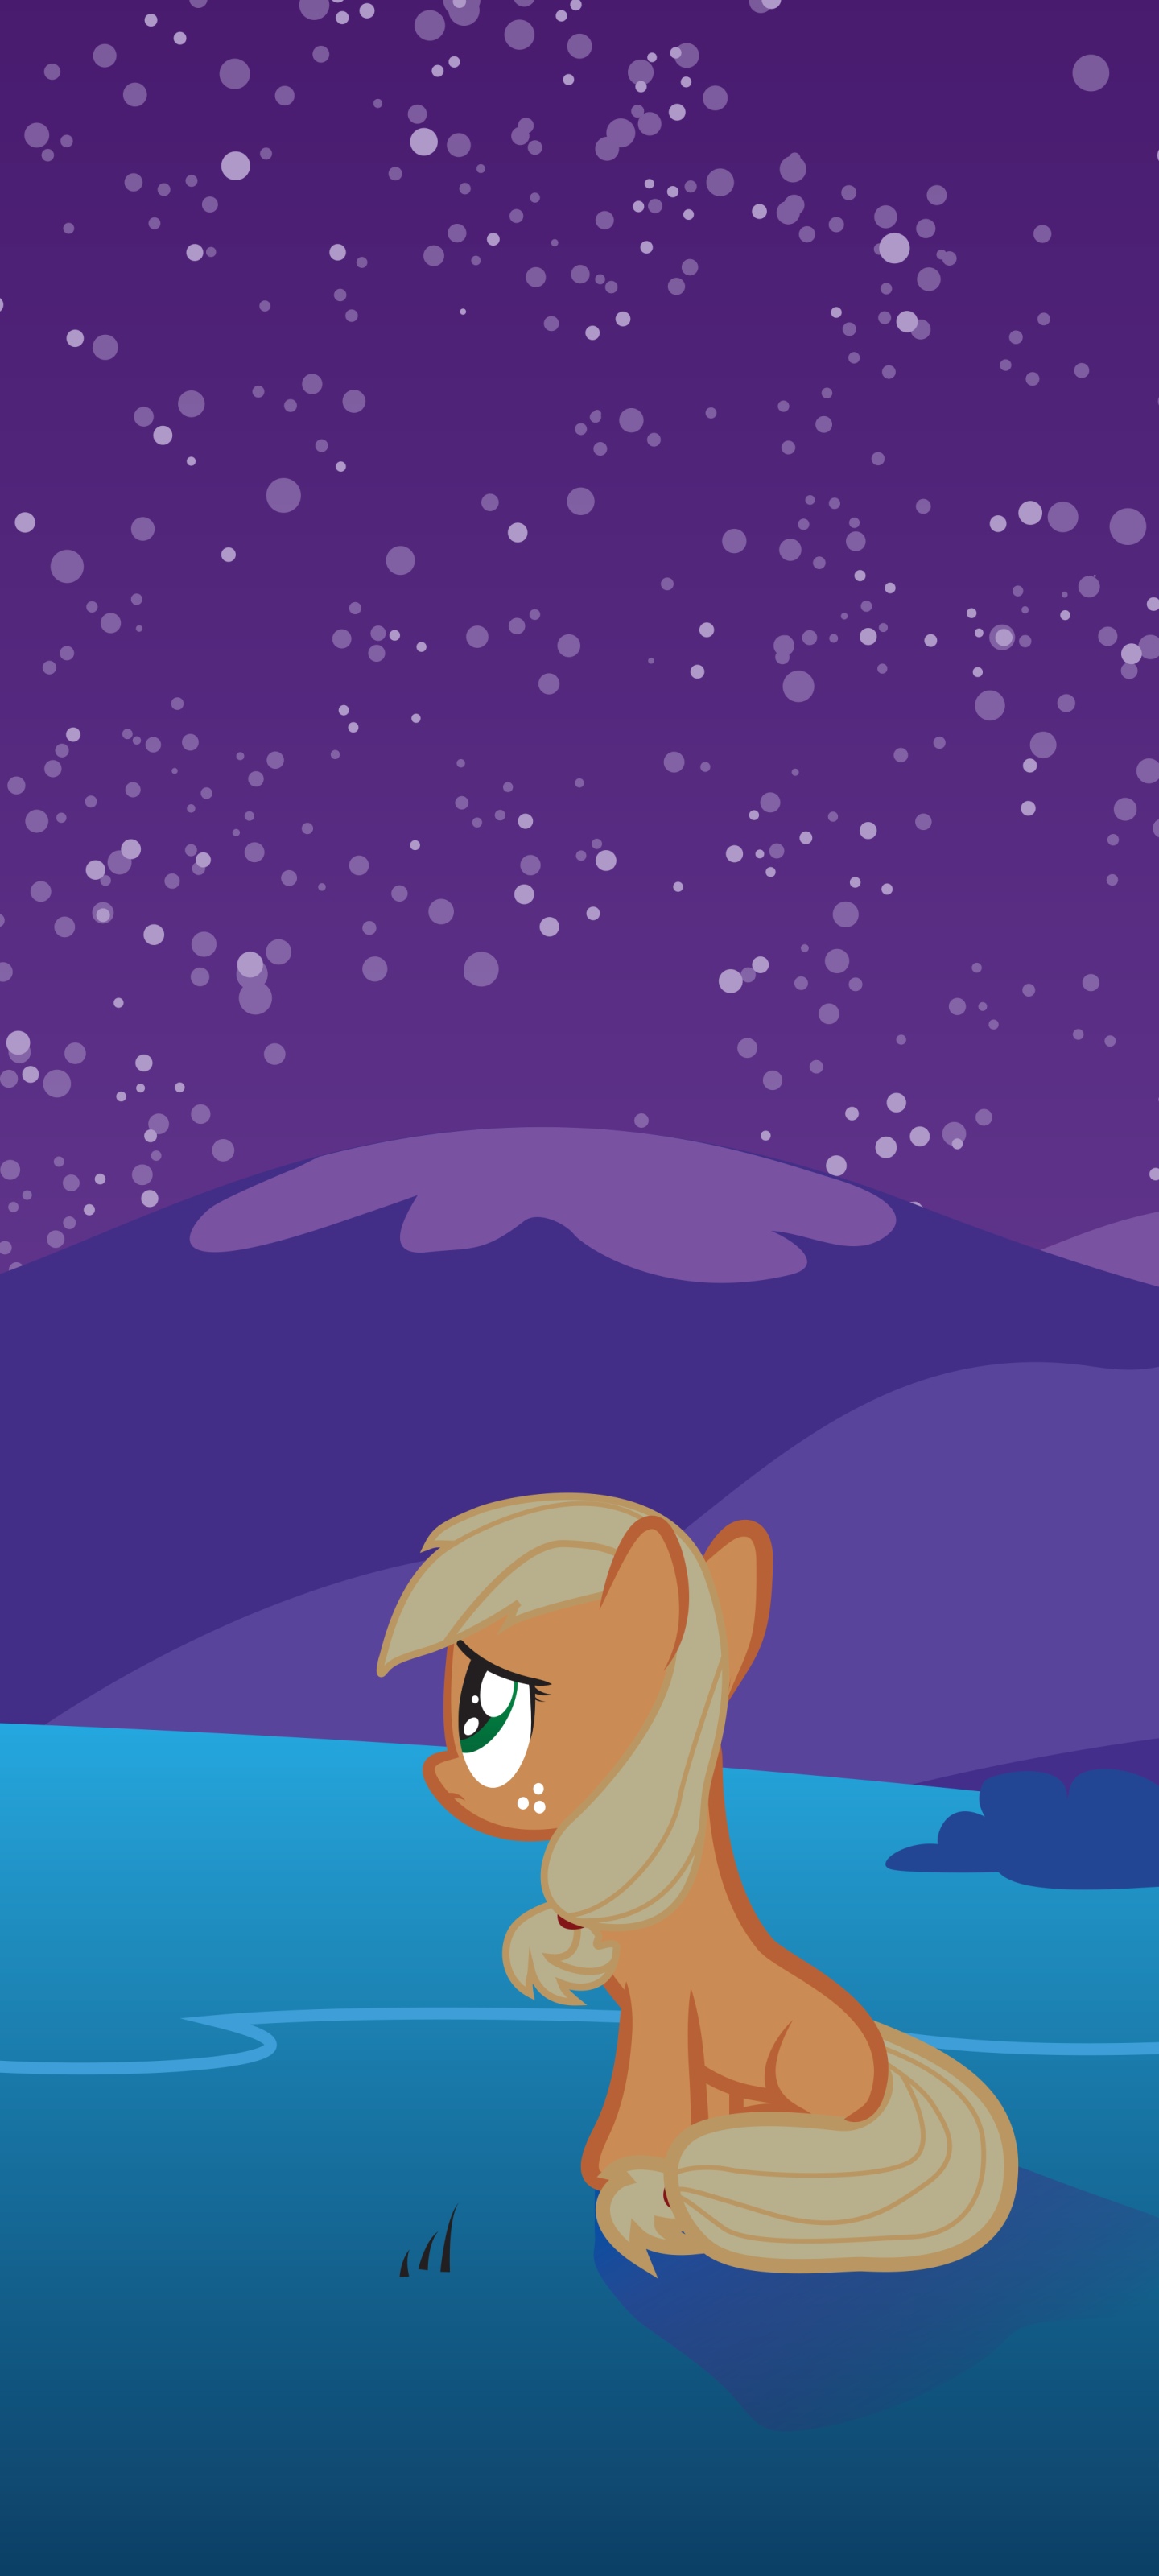 My Little Pony: Friendship is Magic Phone Wallpaper by donnybuy